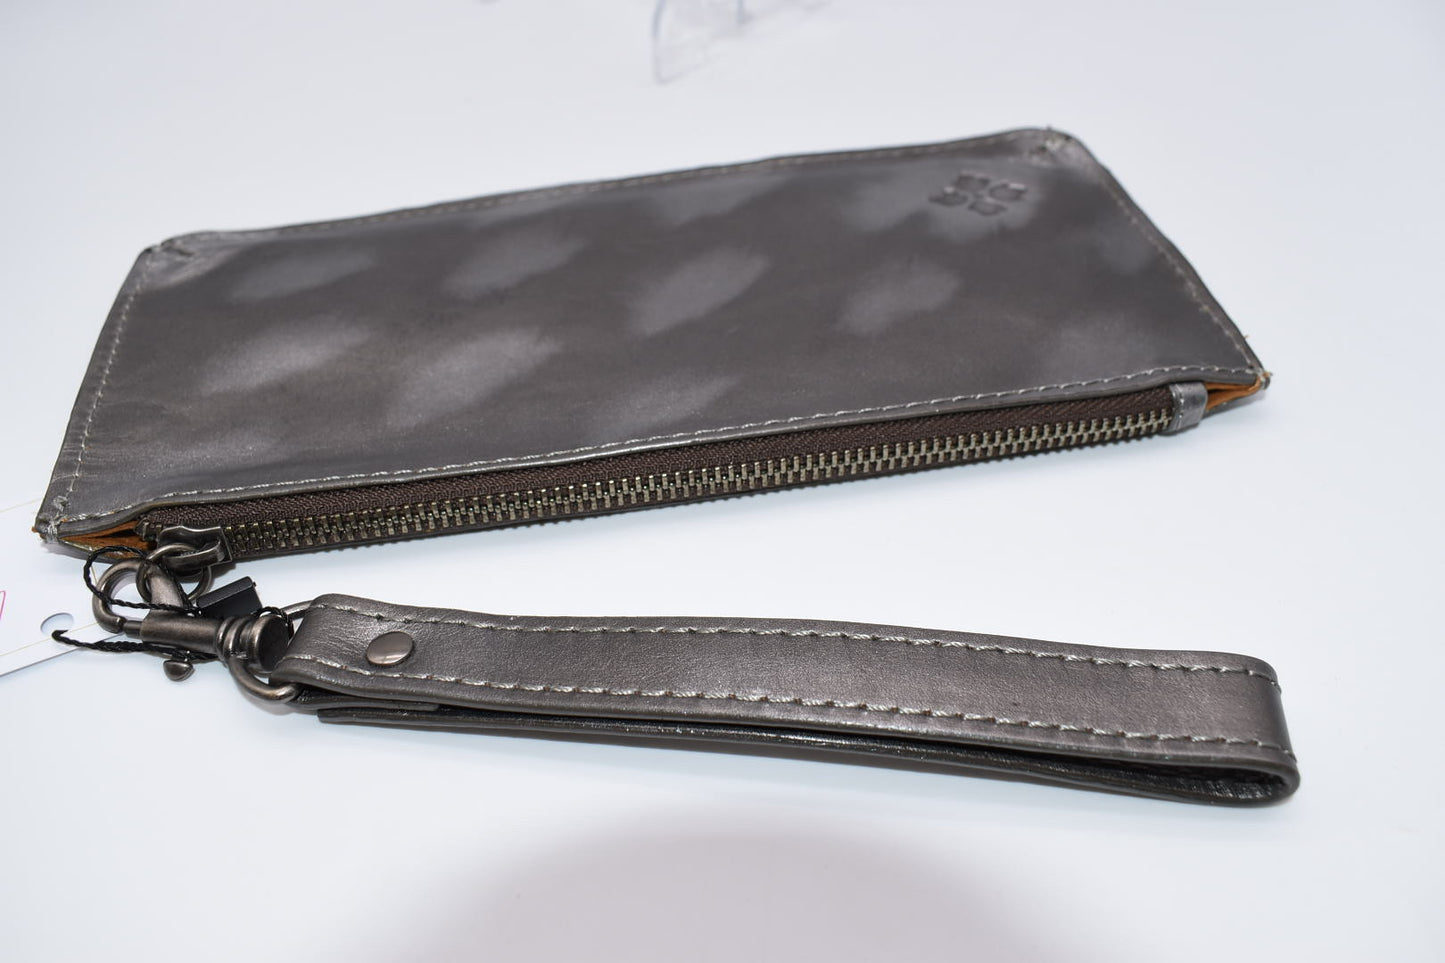 Patricia Nash St. Croce Wristlet in Tooled Metallic Leather